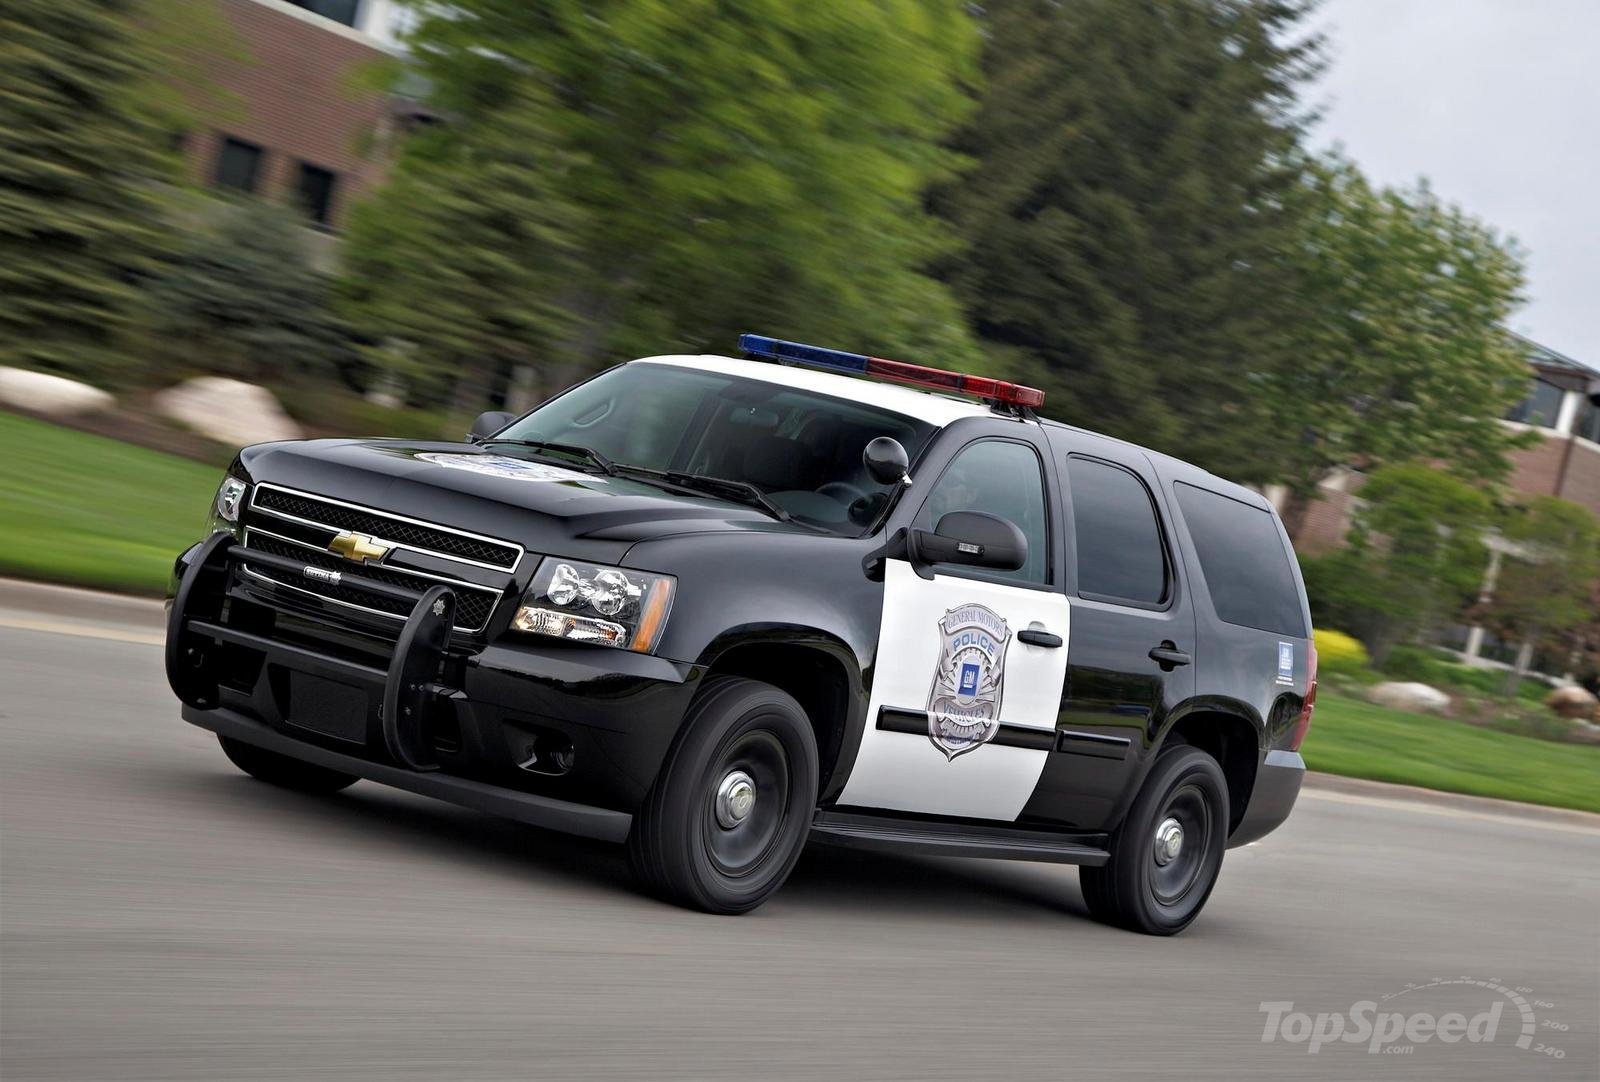 Photos with the 2010 Chevrolet Tahoe Police car | Automotor Blog